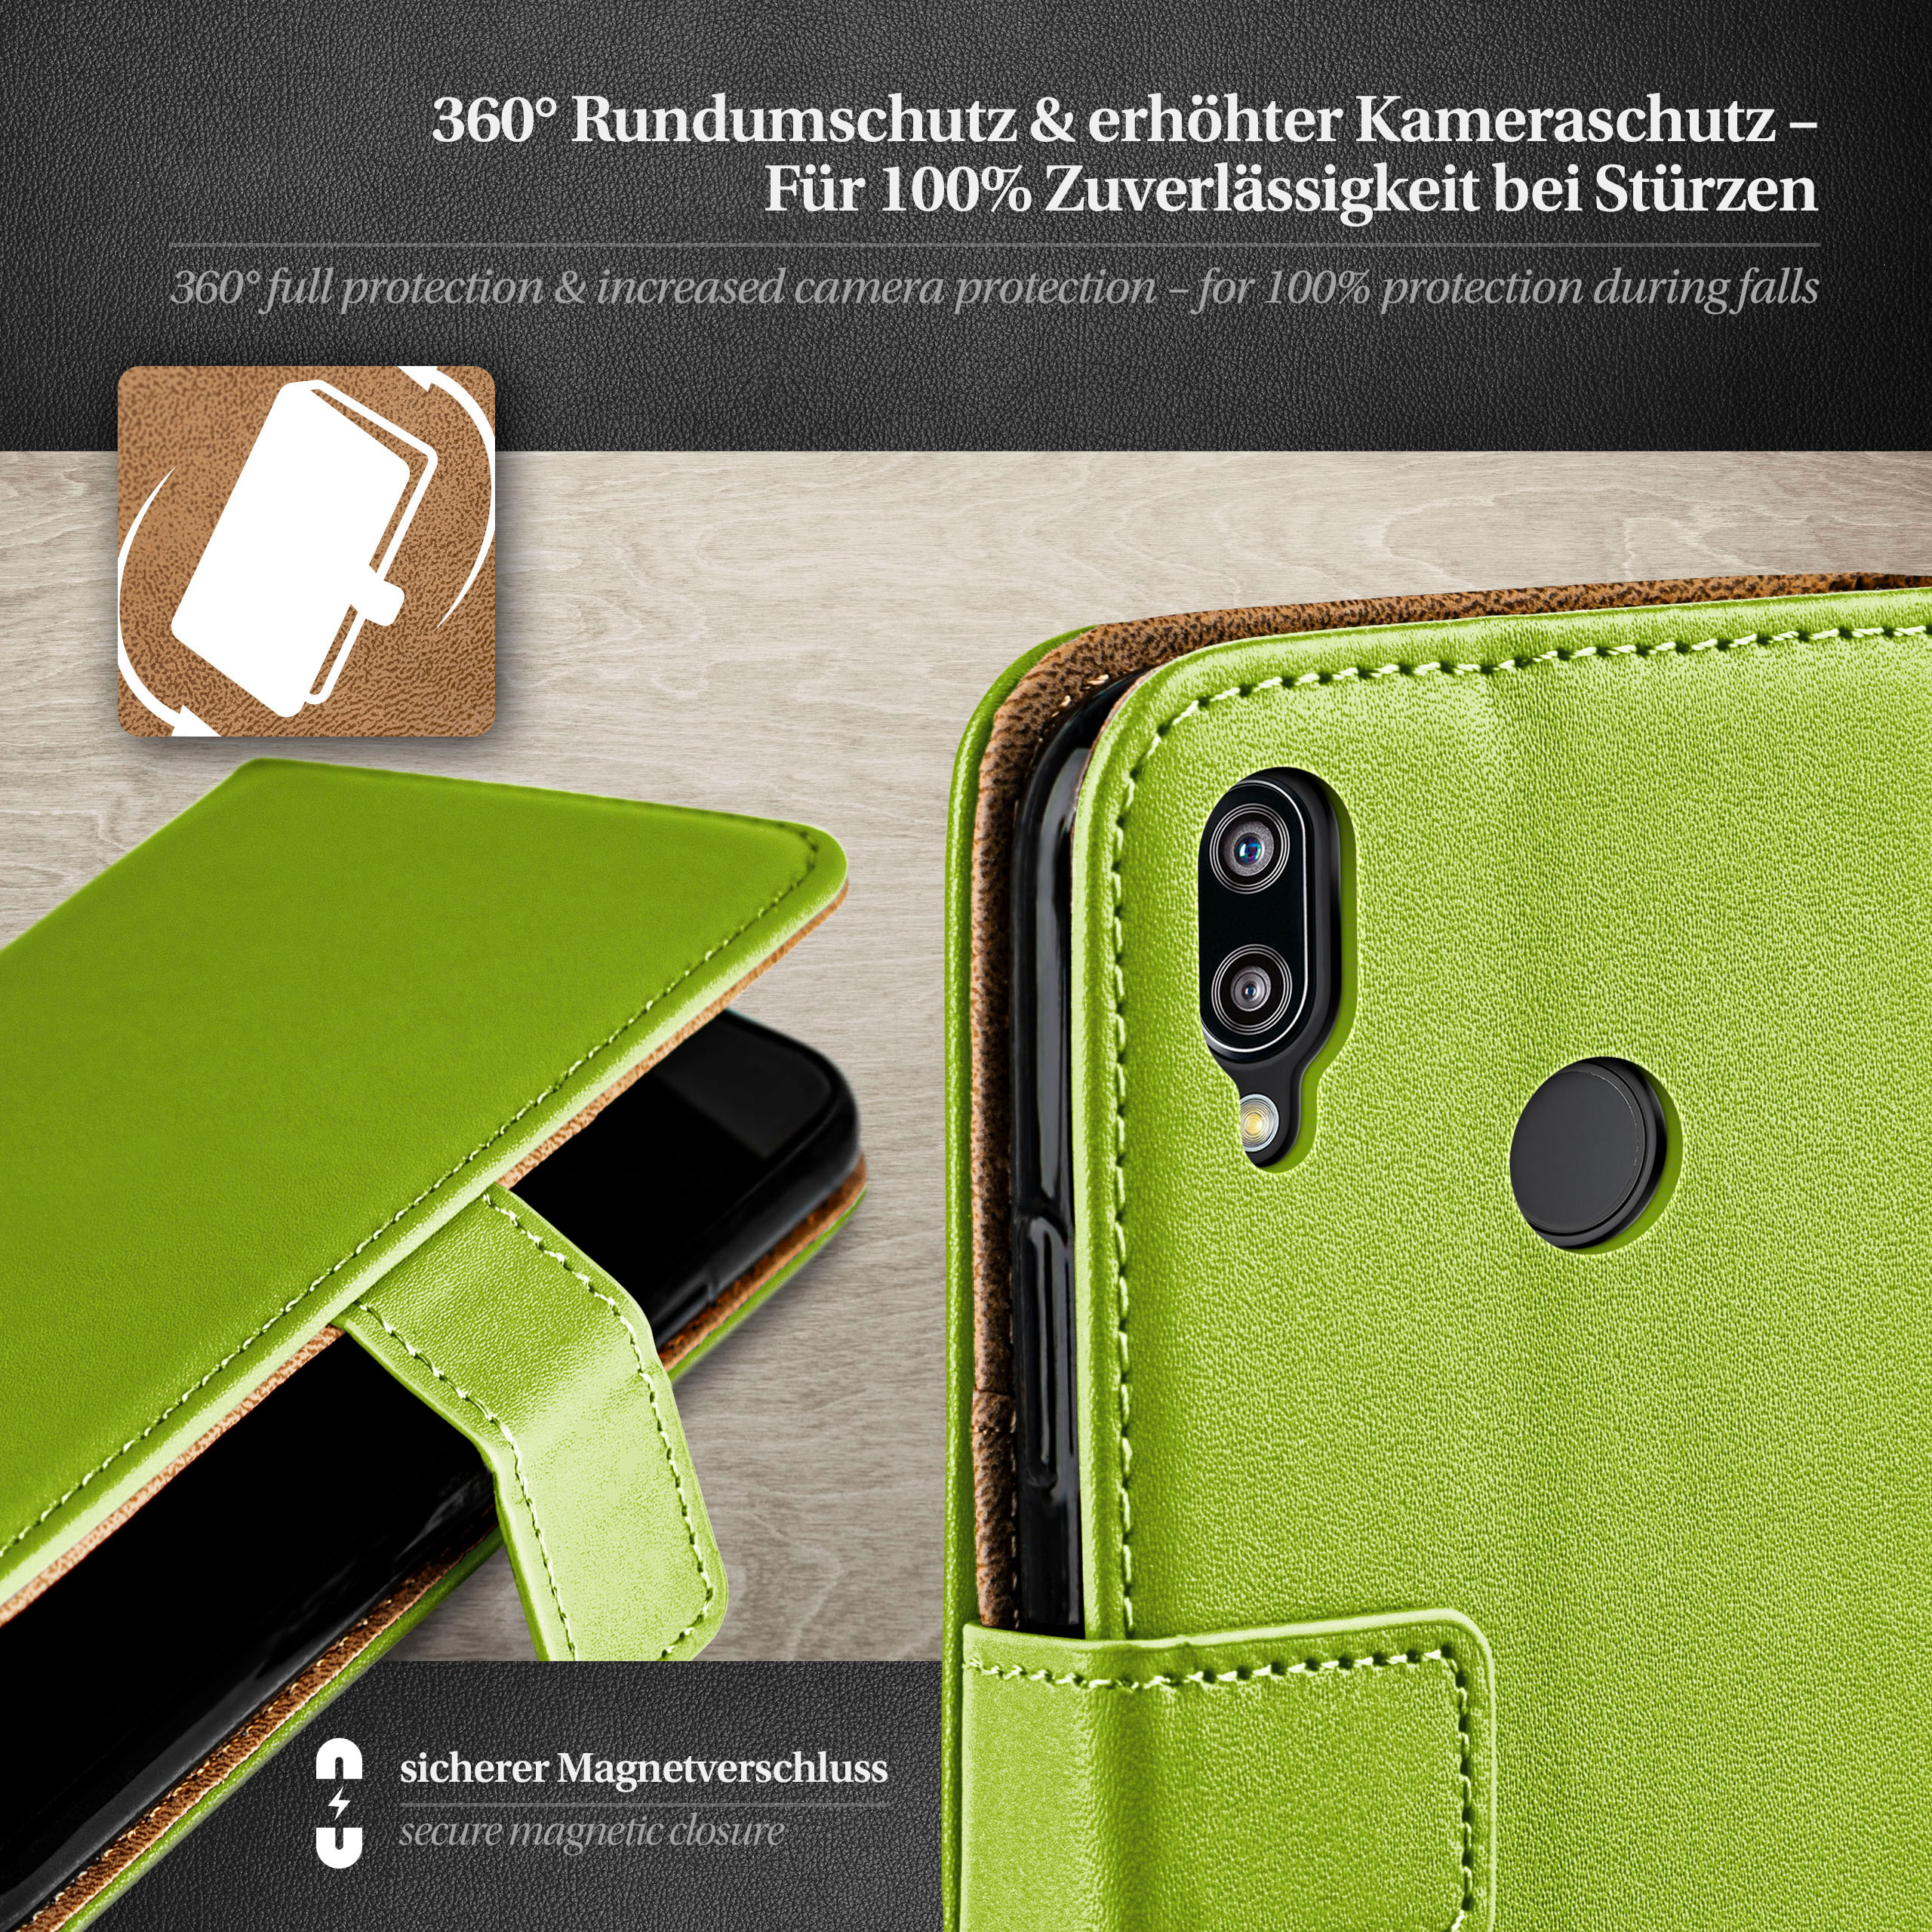 MOEX Book Case, Bookcover, P20 Lime-Green Huawei, Lite